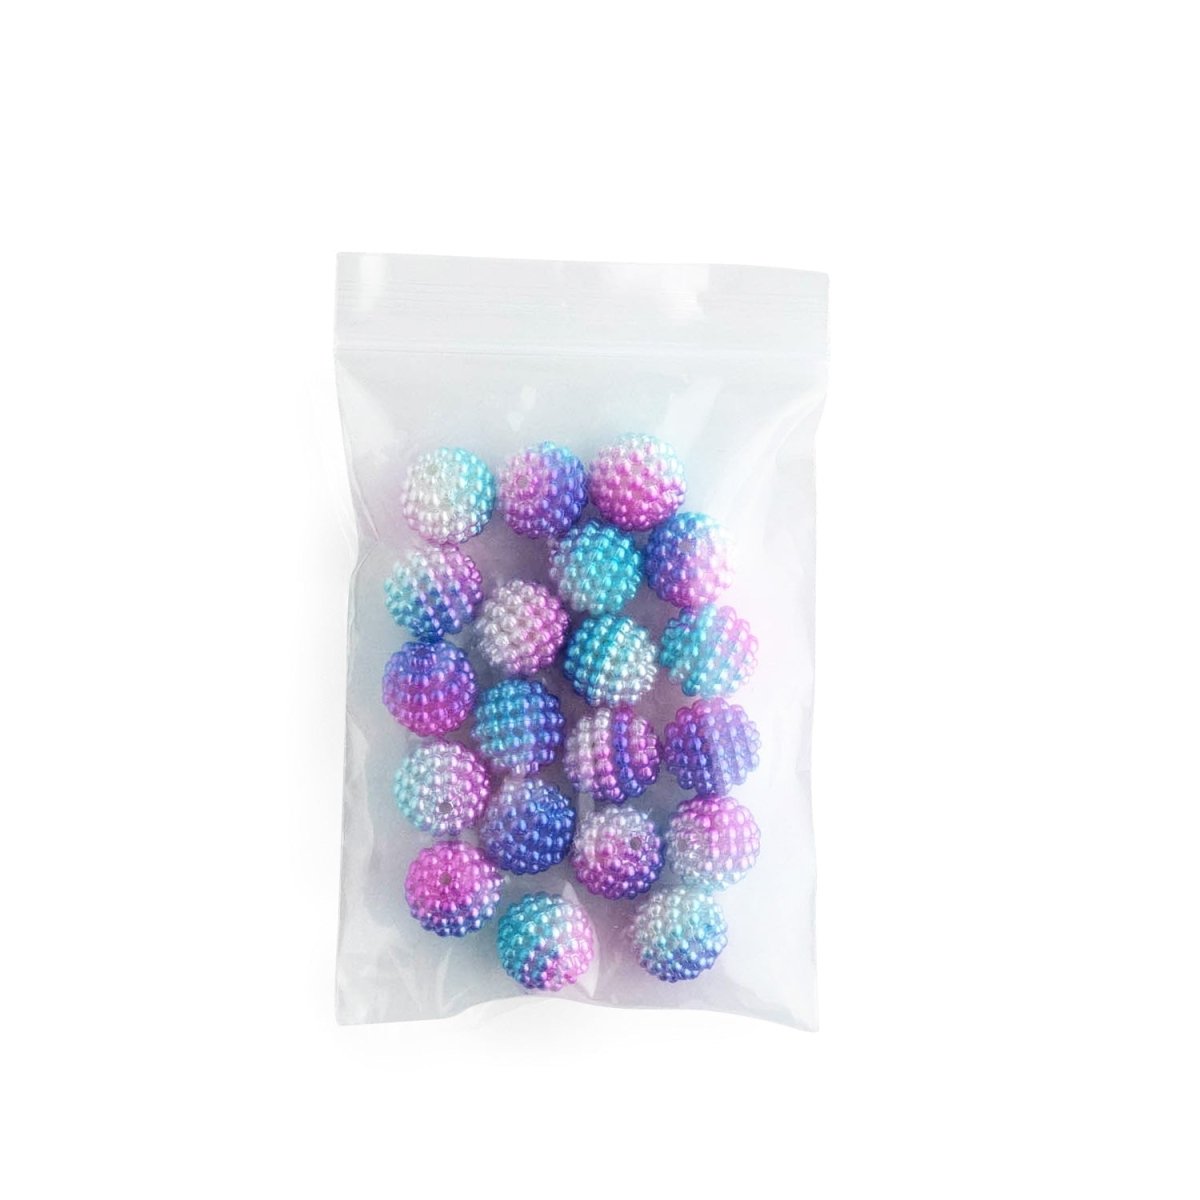 Acrylic Round Beads Ombre Pearl Berry Rhinestones 10mm Mermaid from Cara & Co Craft Supply